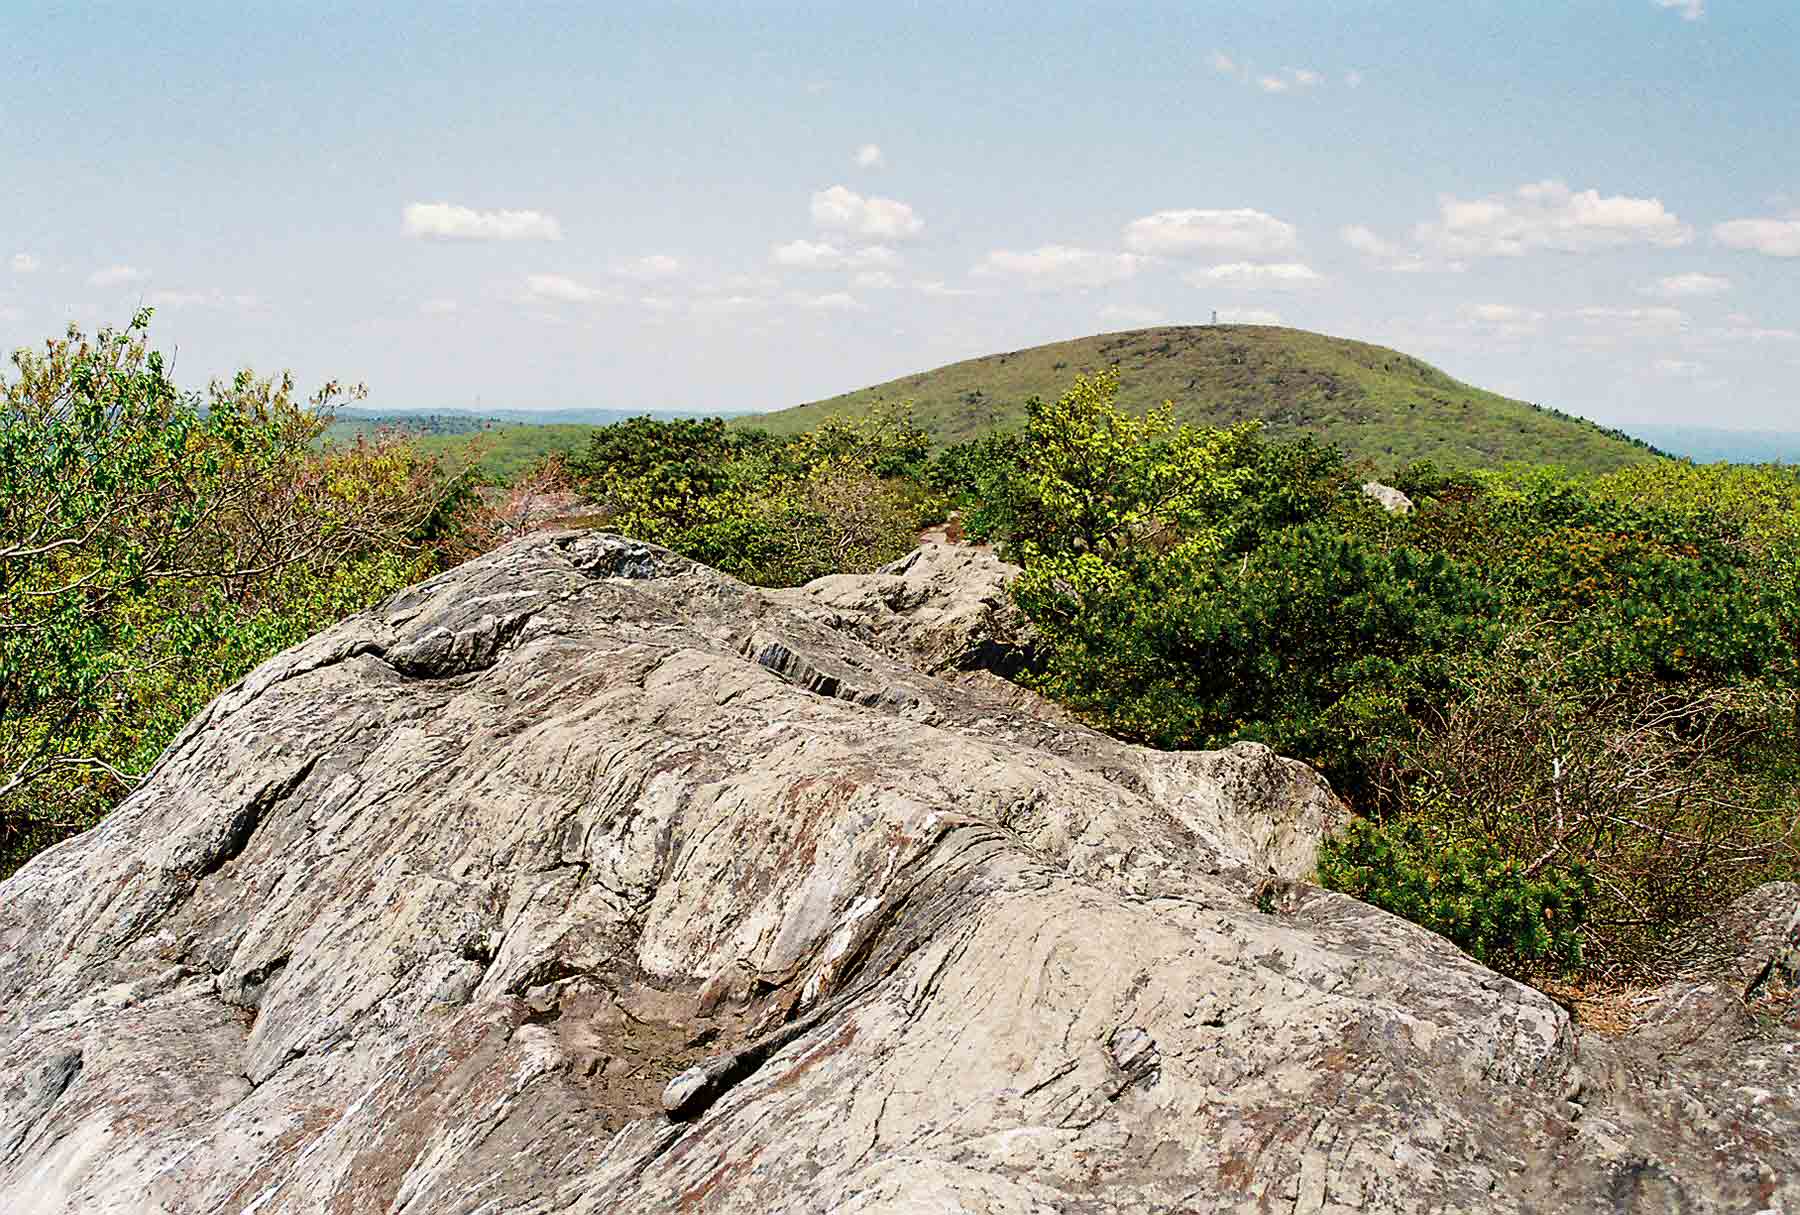 mm 6.4 - View to the north from the summit of Race Mt. The tower seen on the top of Mt. Everett has since been dismantled.  Courtesy dlcul@conncoll.edu